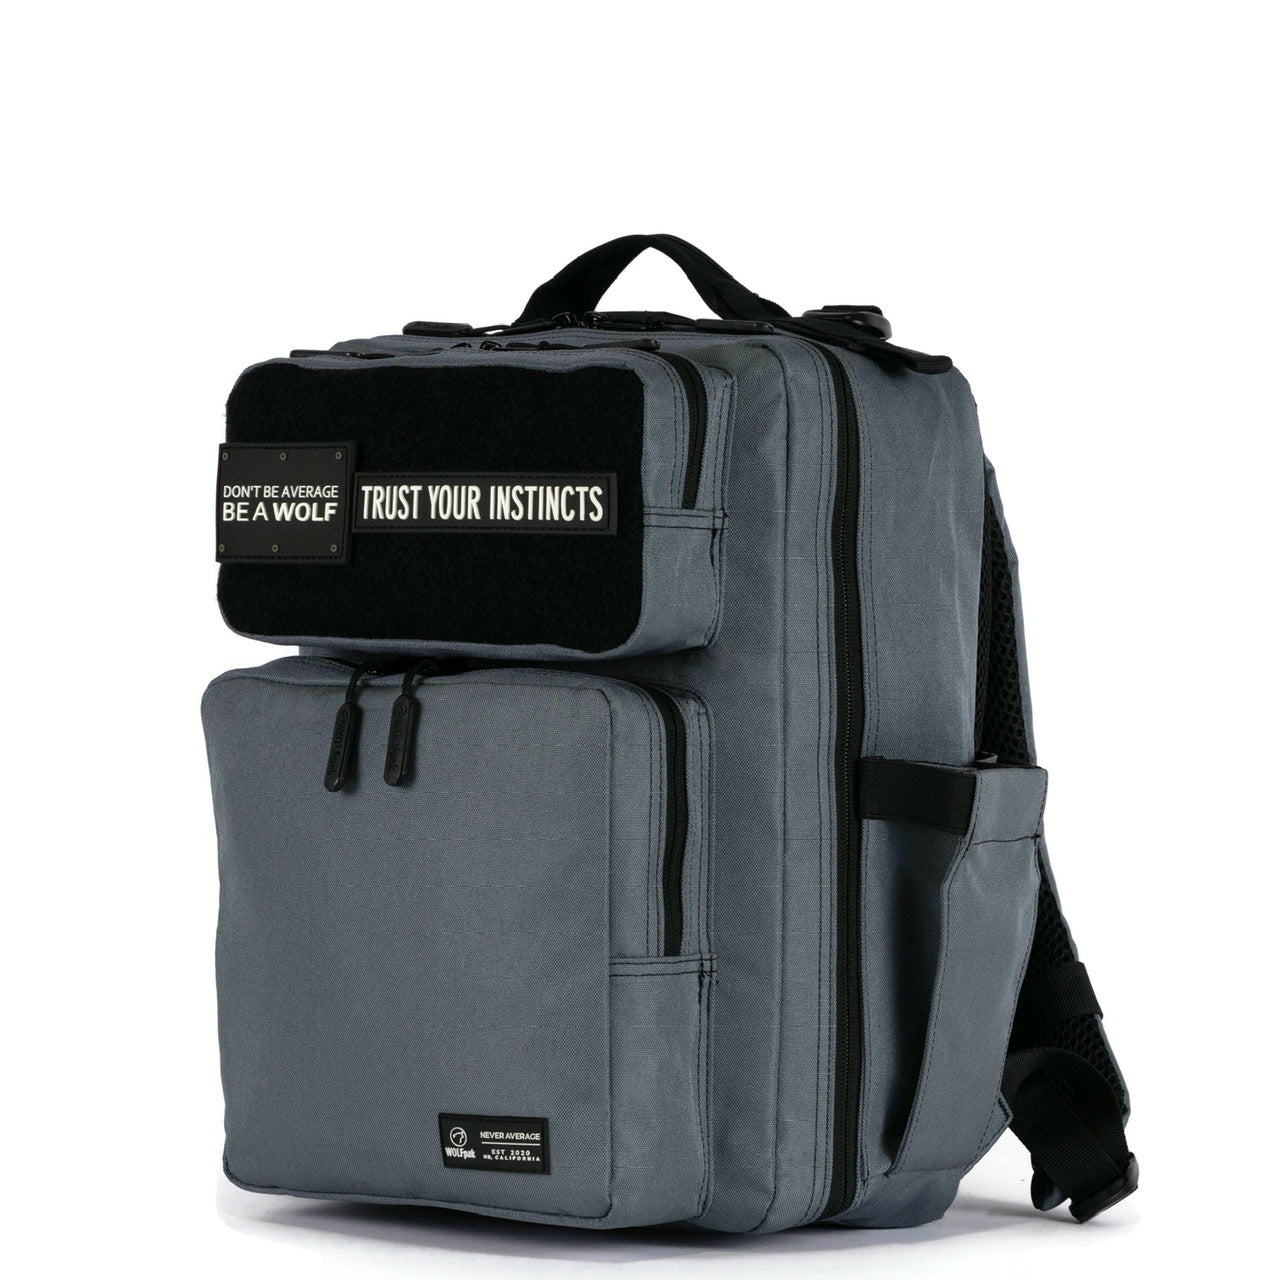 15L Backpack Iron Gray